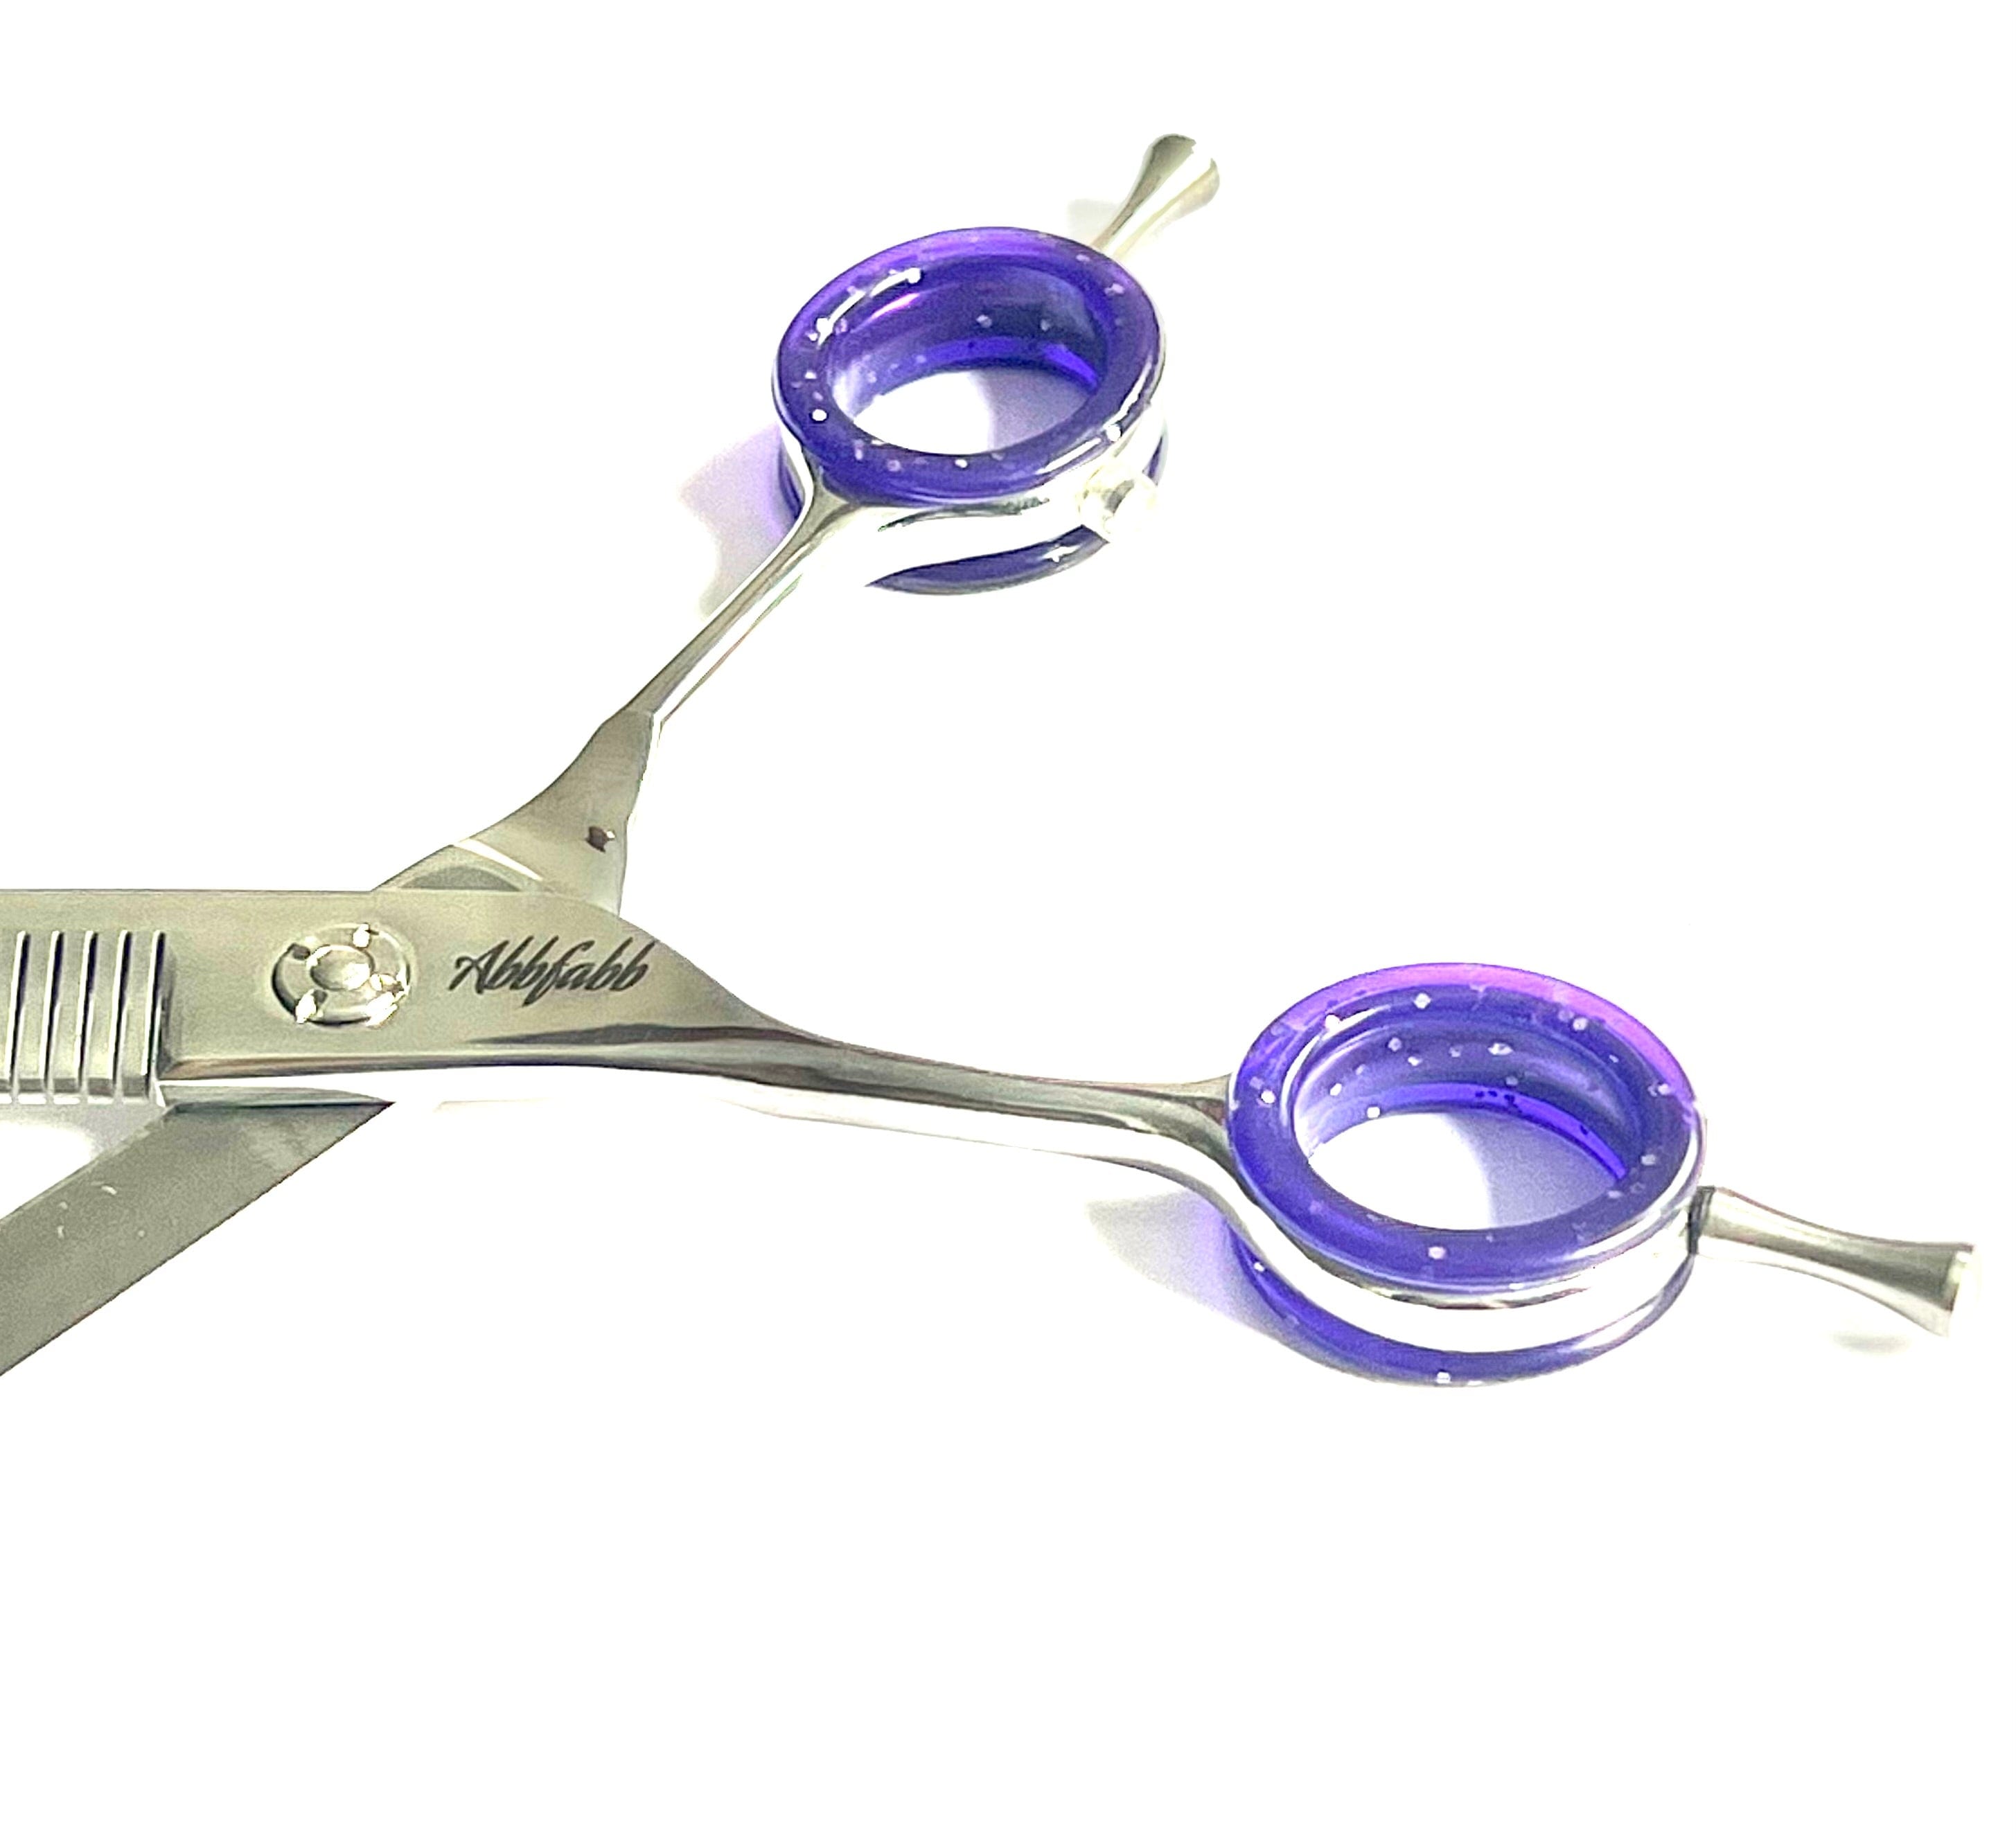 Abbfabb Grooming Scissors Ltd Left Handed 7" 40 Piano Teeth Reversible Curved Thinning Scissor. Left Handed 7" Flippable Curved Fluffer.